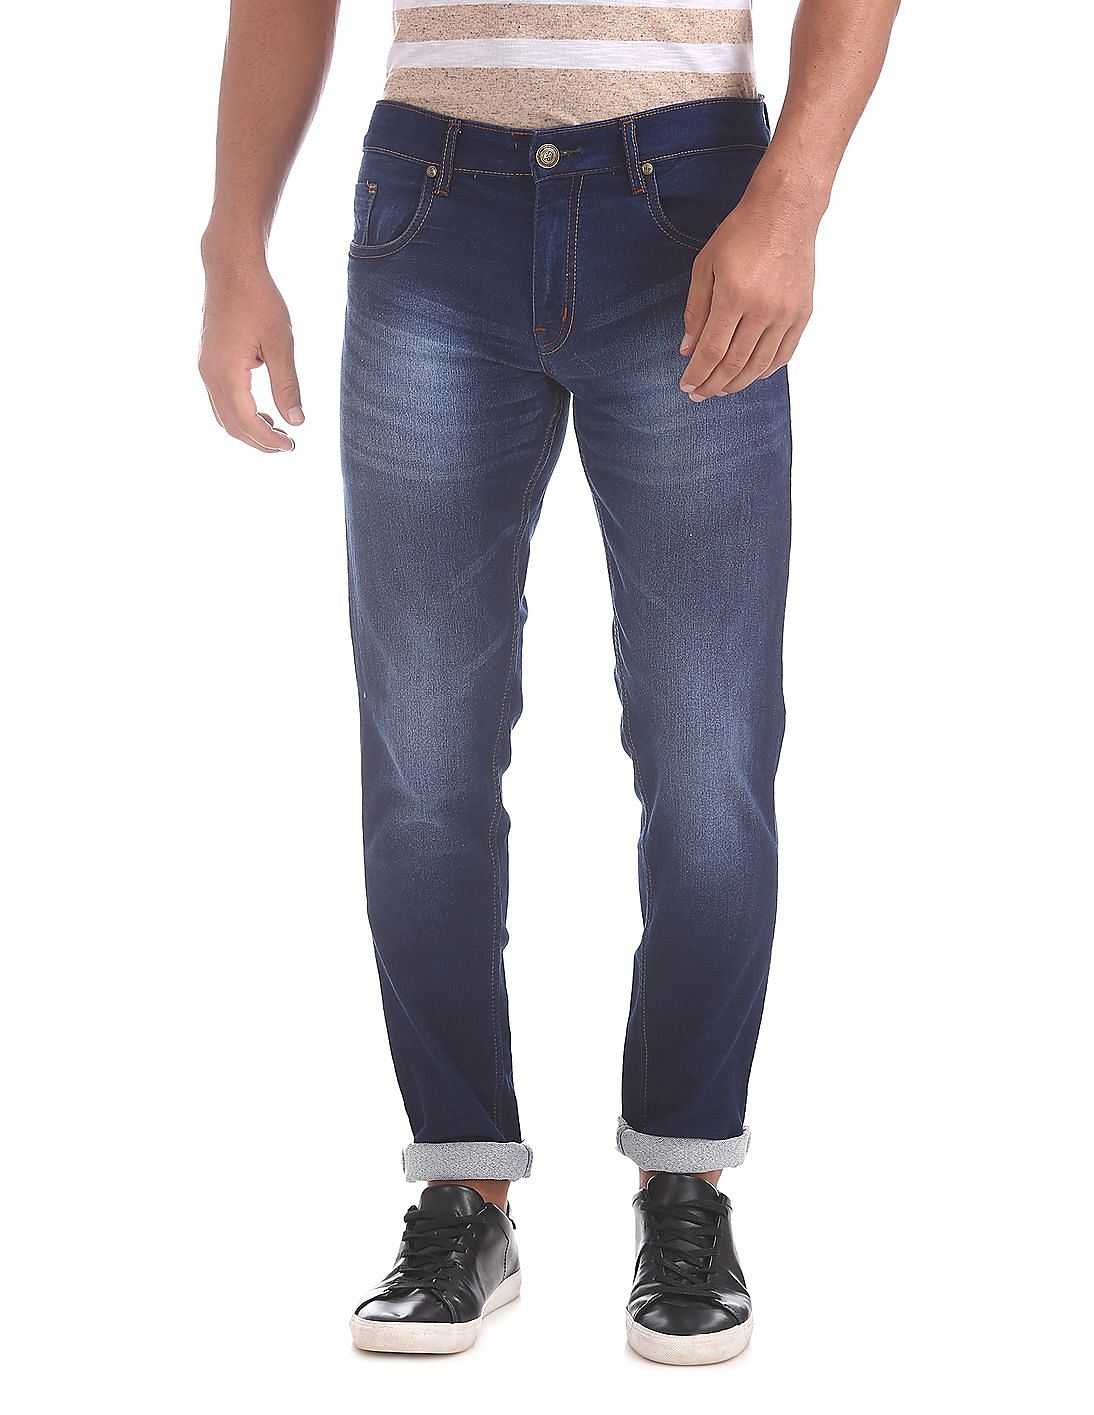 Buy Men Slim Fit Stone Washed Jeans online at NNNOW.com